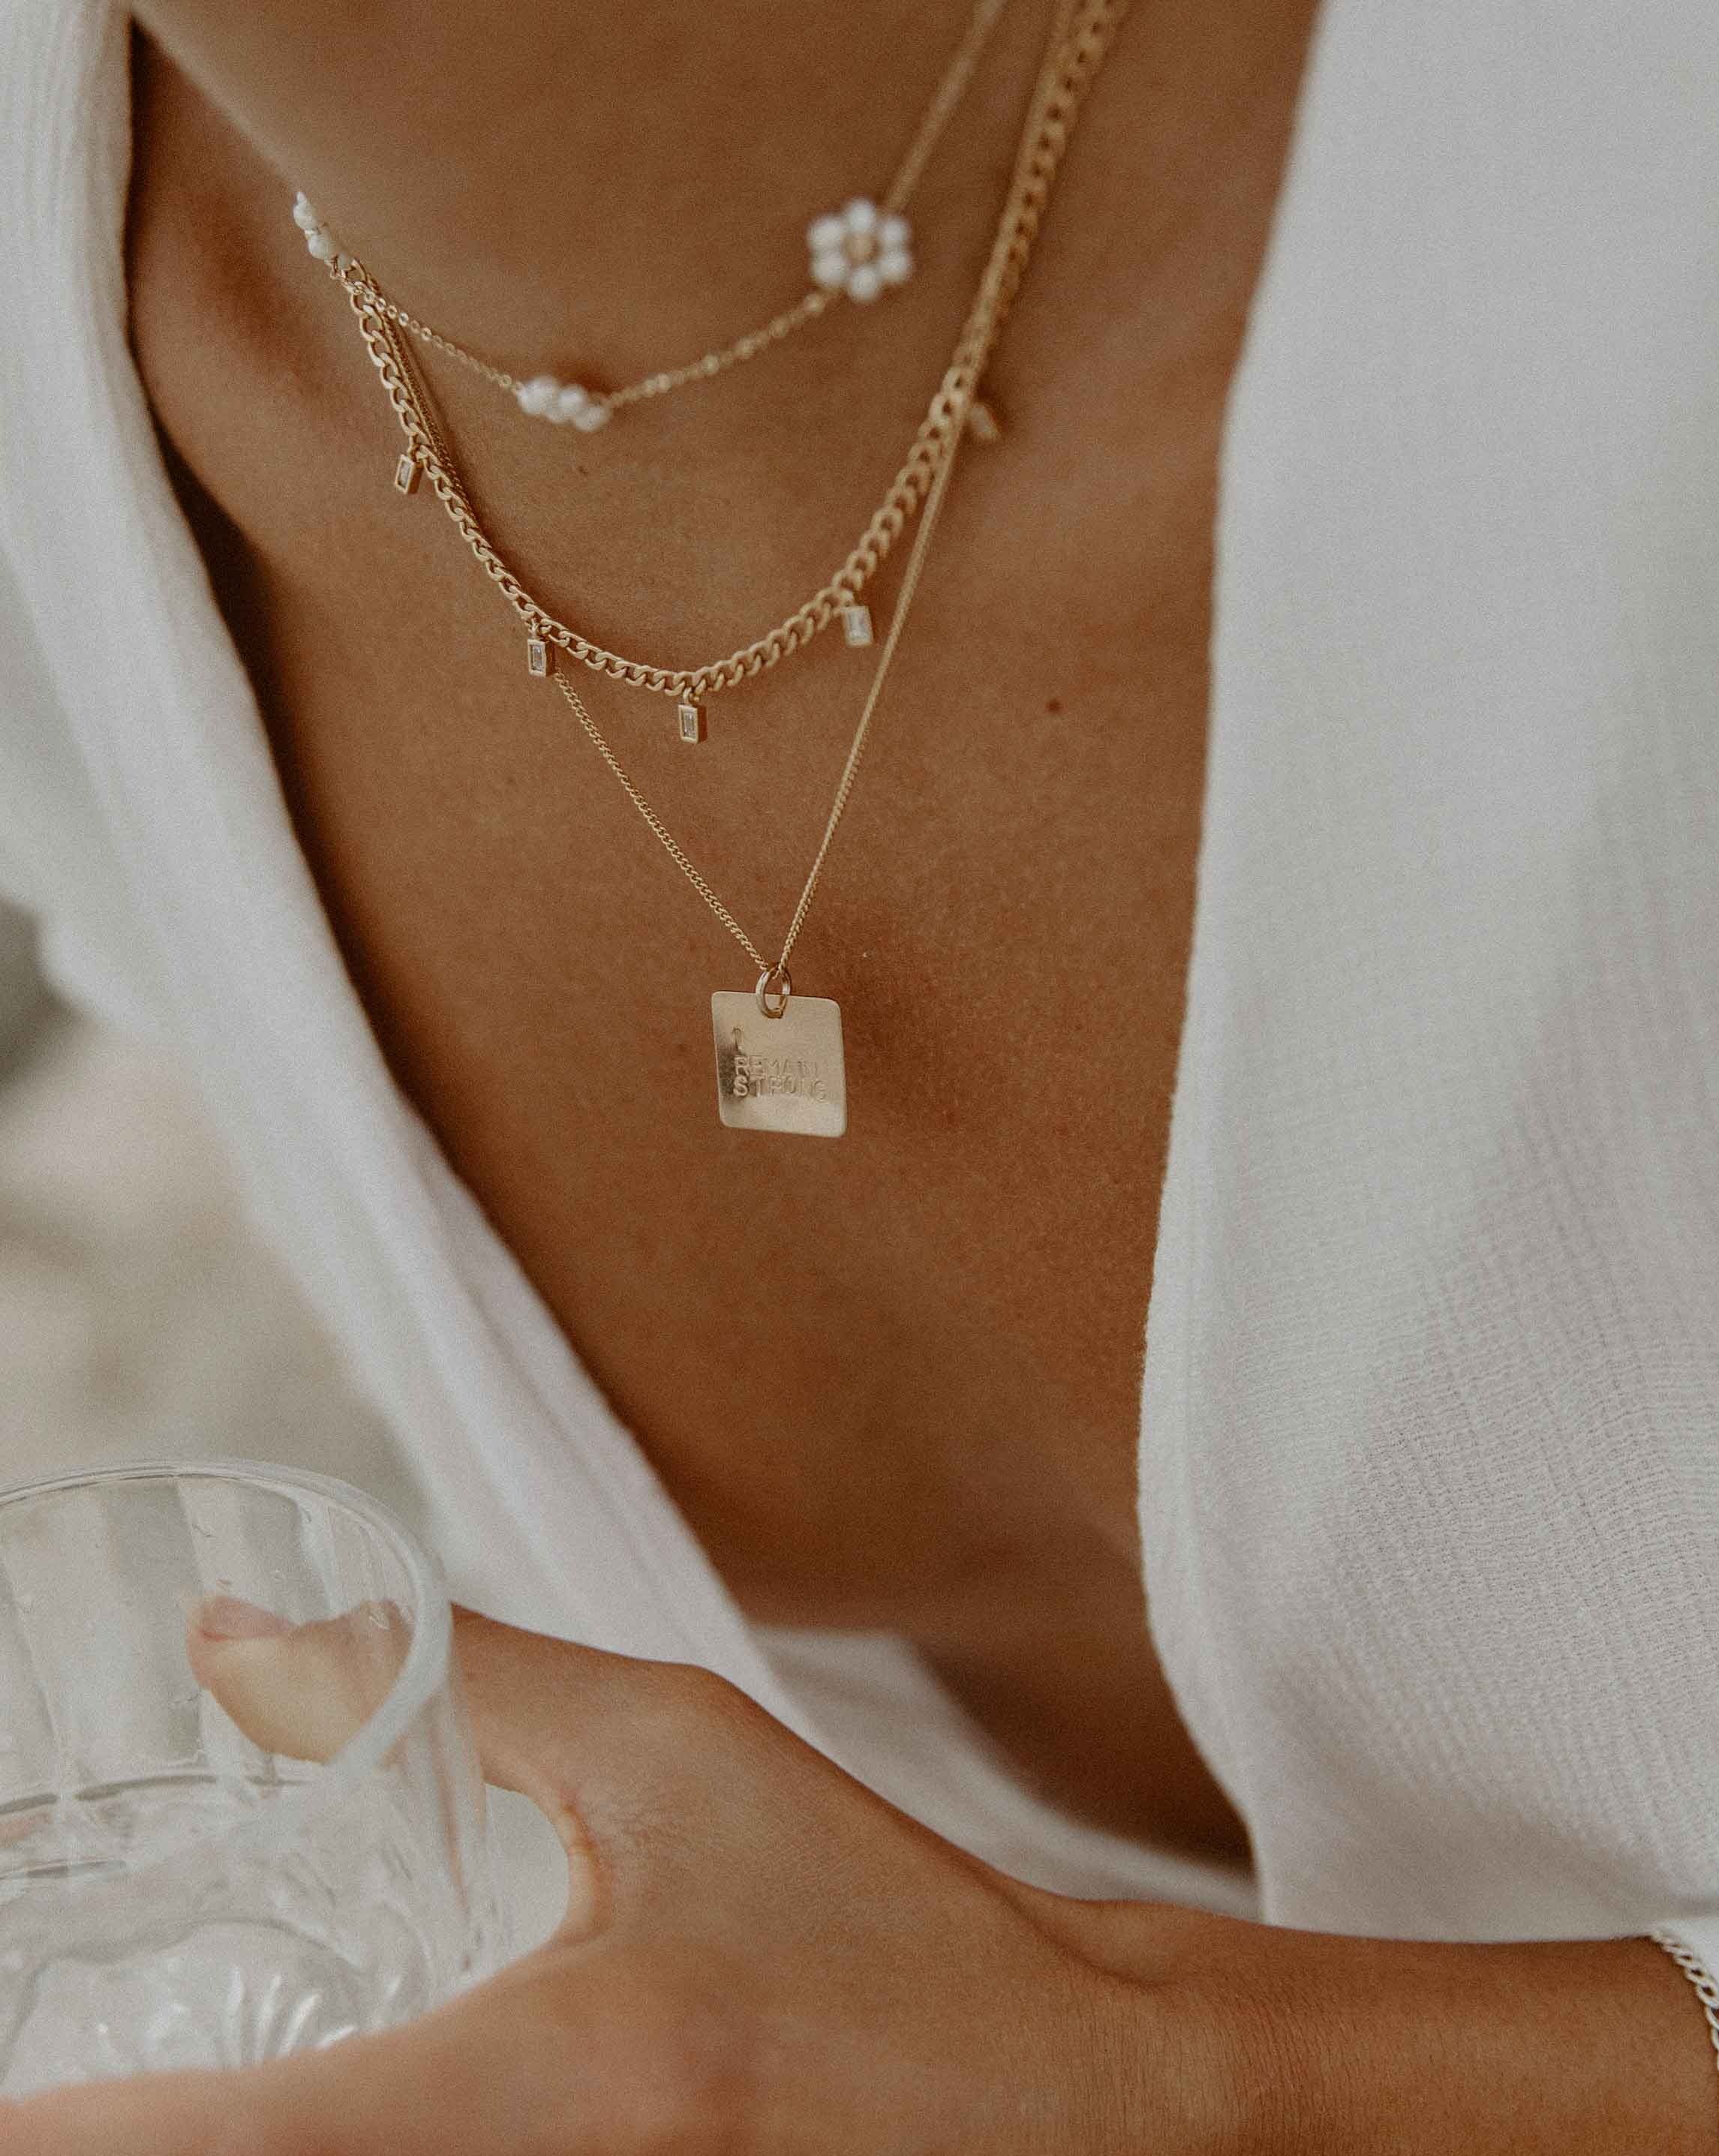 Zola Necklace by KOZAKH. A 16 to 18 inch adjustable length necklace, crafted in 14K Gold Filled, featuring a flat square pendant with engraved customizable quote.